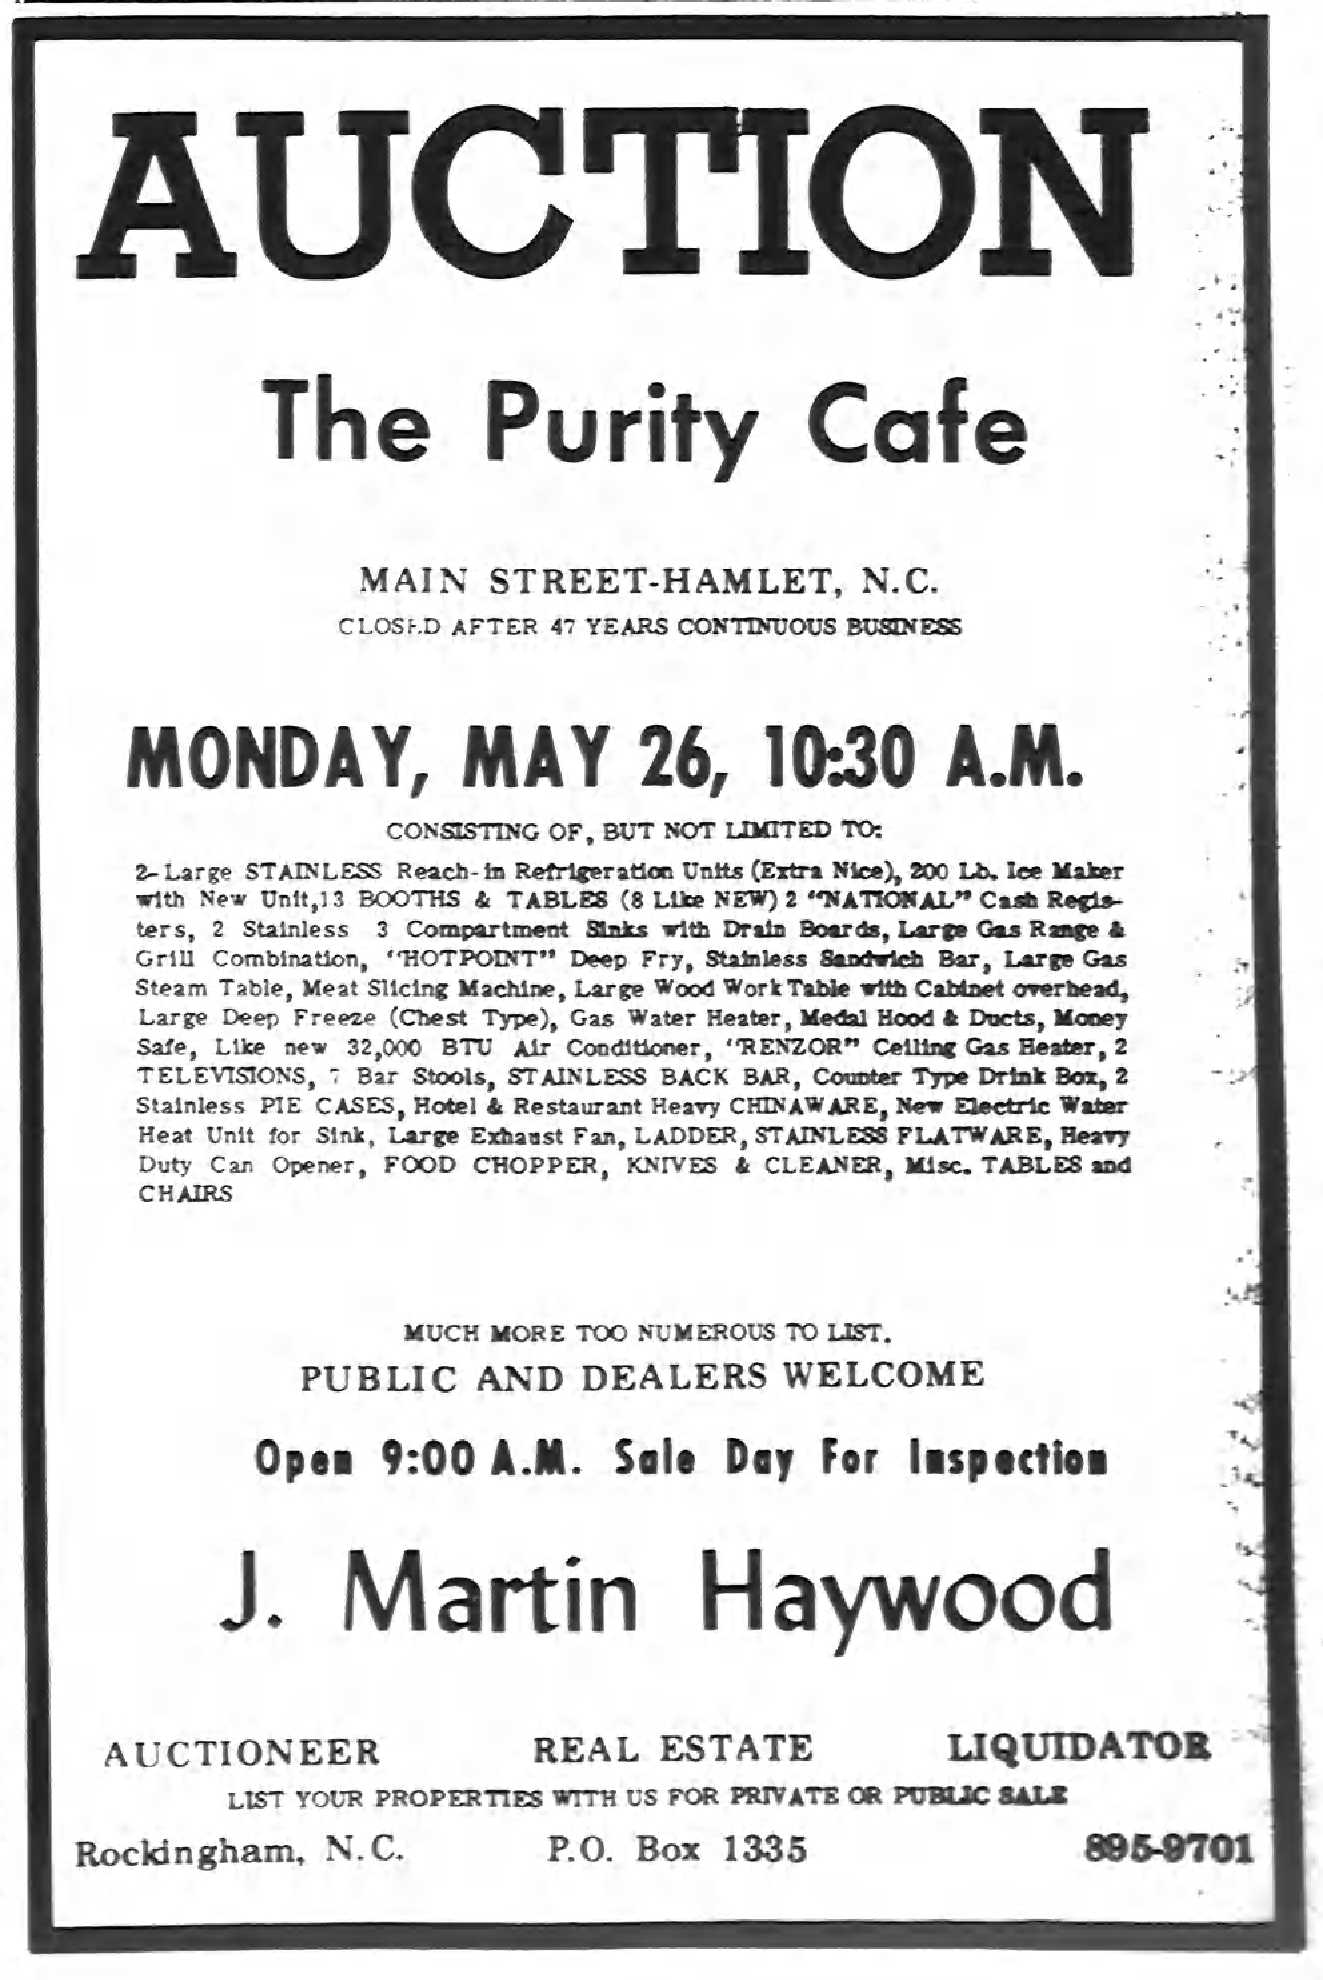 1969 Purity Cafe auction.jpg